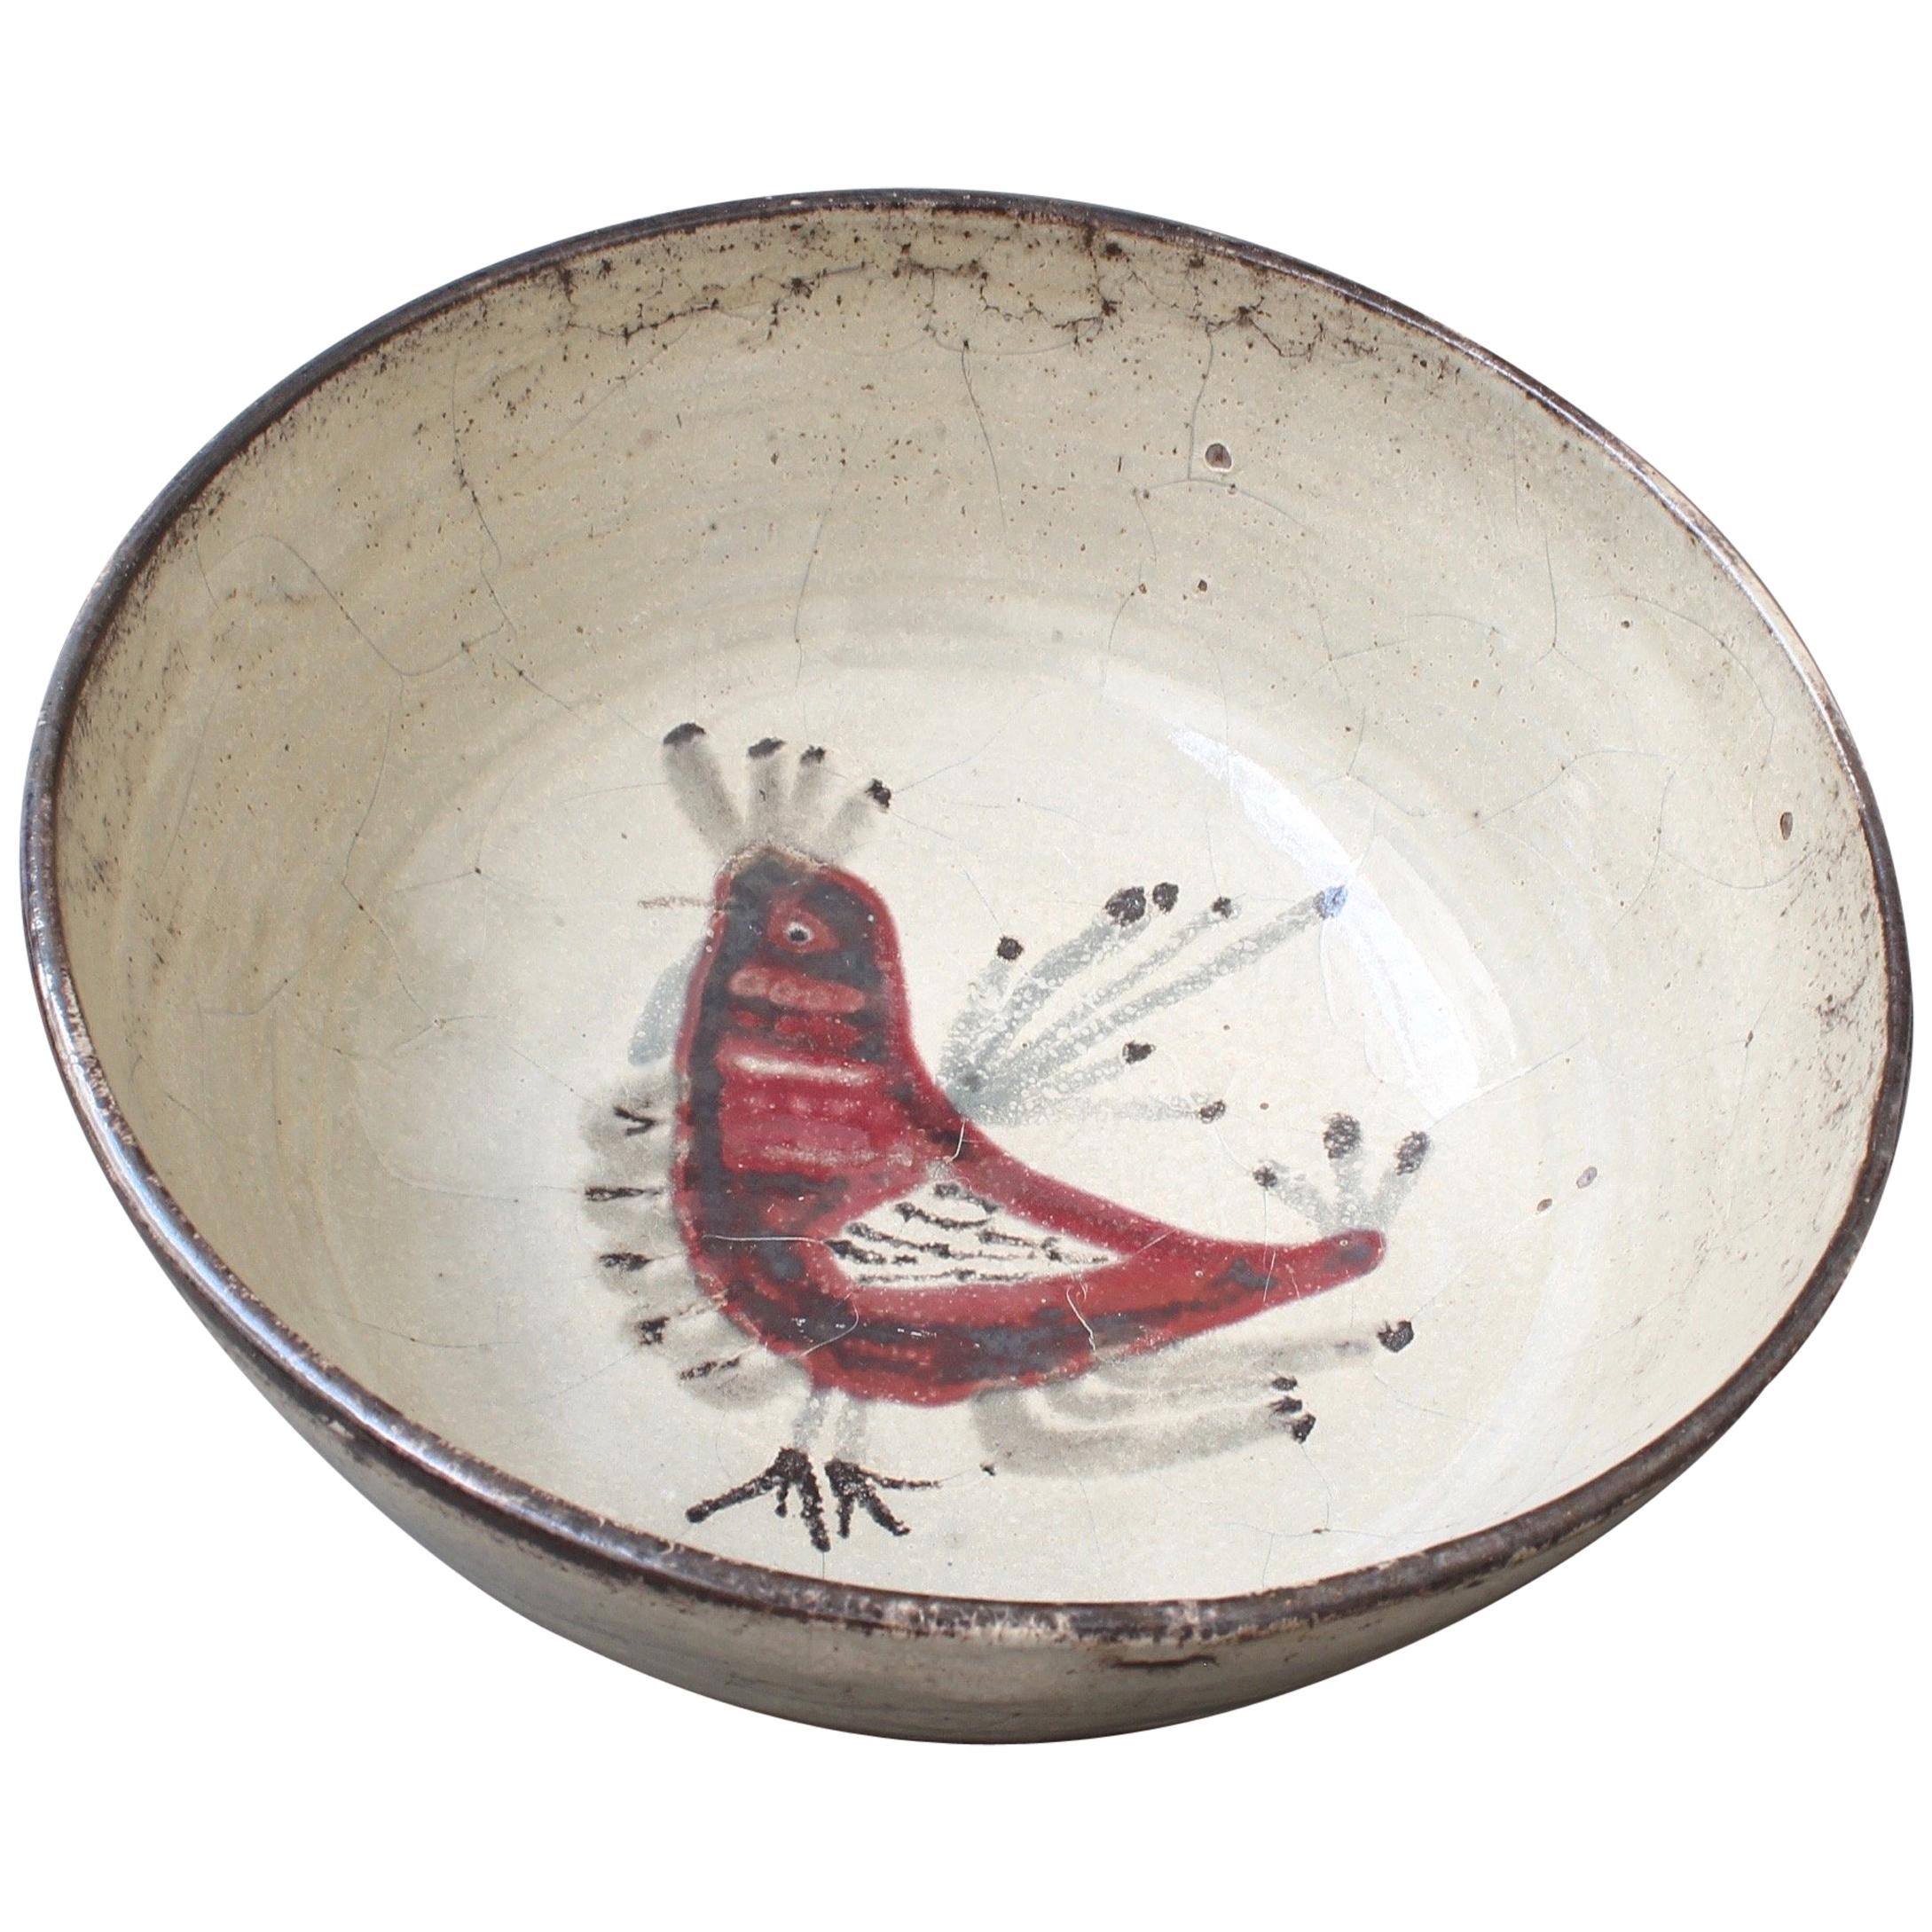 'Ceramic French Rooster Motif Bowl' by Gustave Reynaud - Le Mûrier, circa 1950s